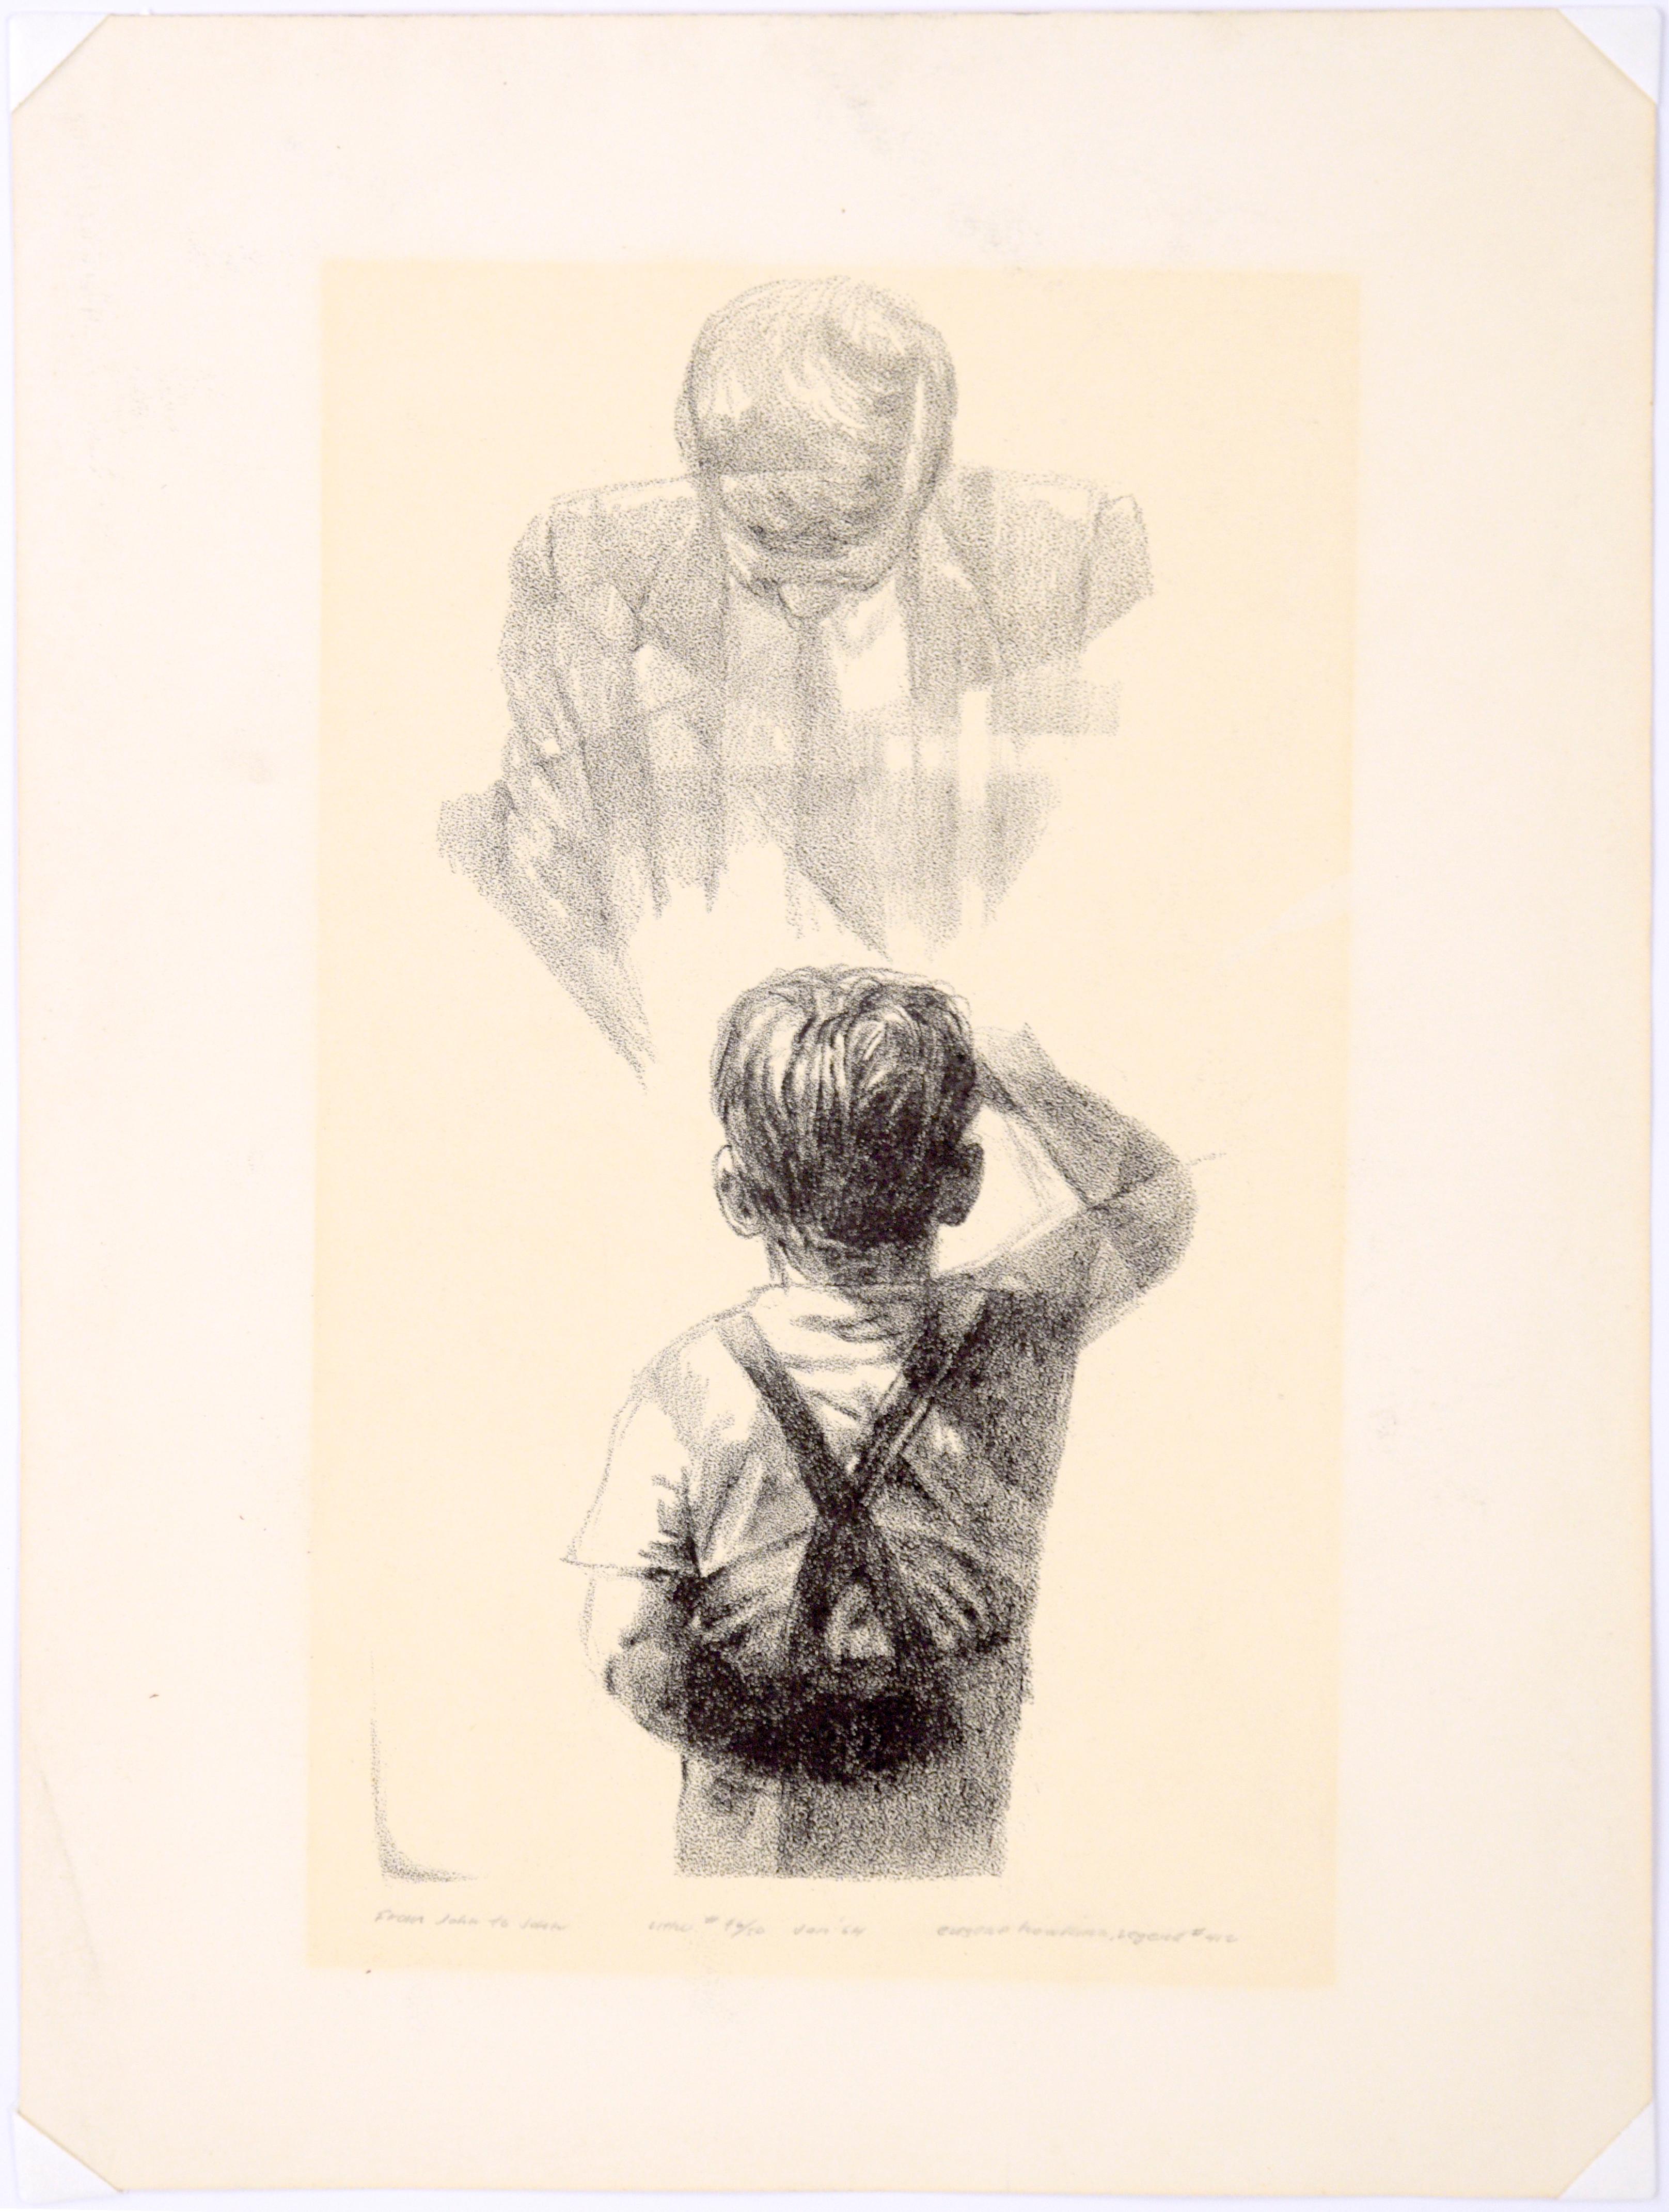 John F. Kennedy, Jr. Salutes His Father, the President - Rare Signed Lithograph - American Modern Print by Eugene Hawkins